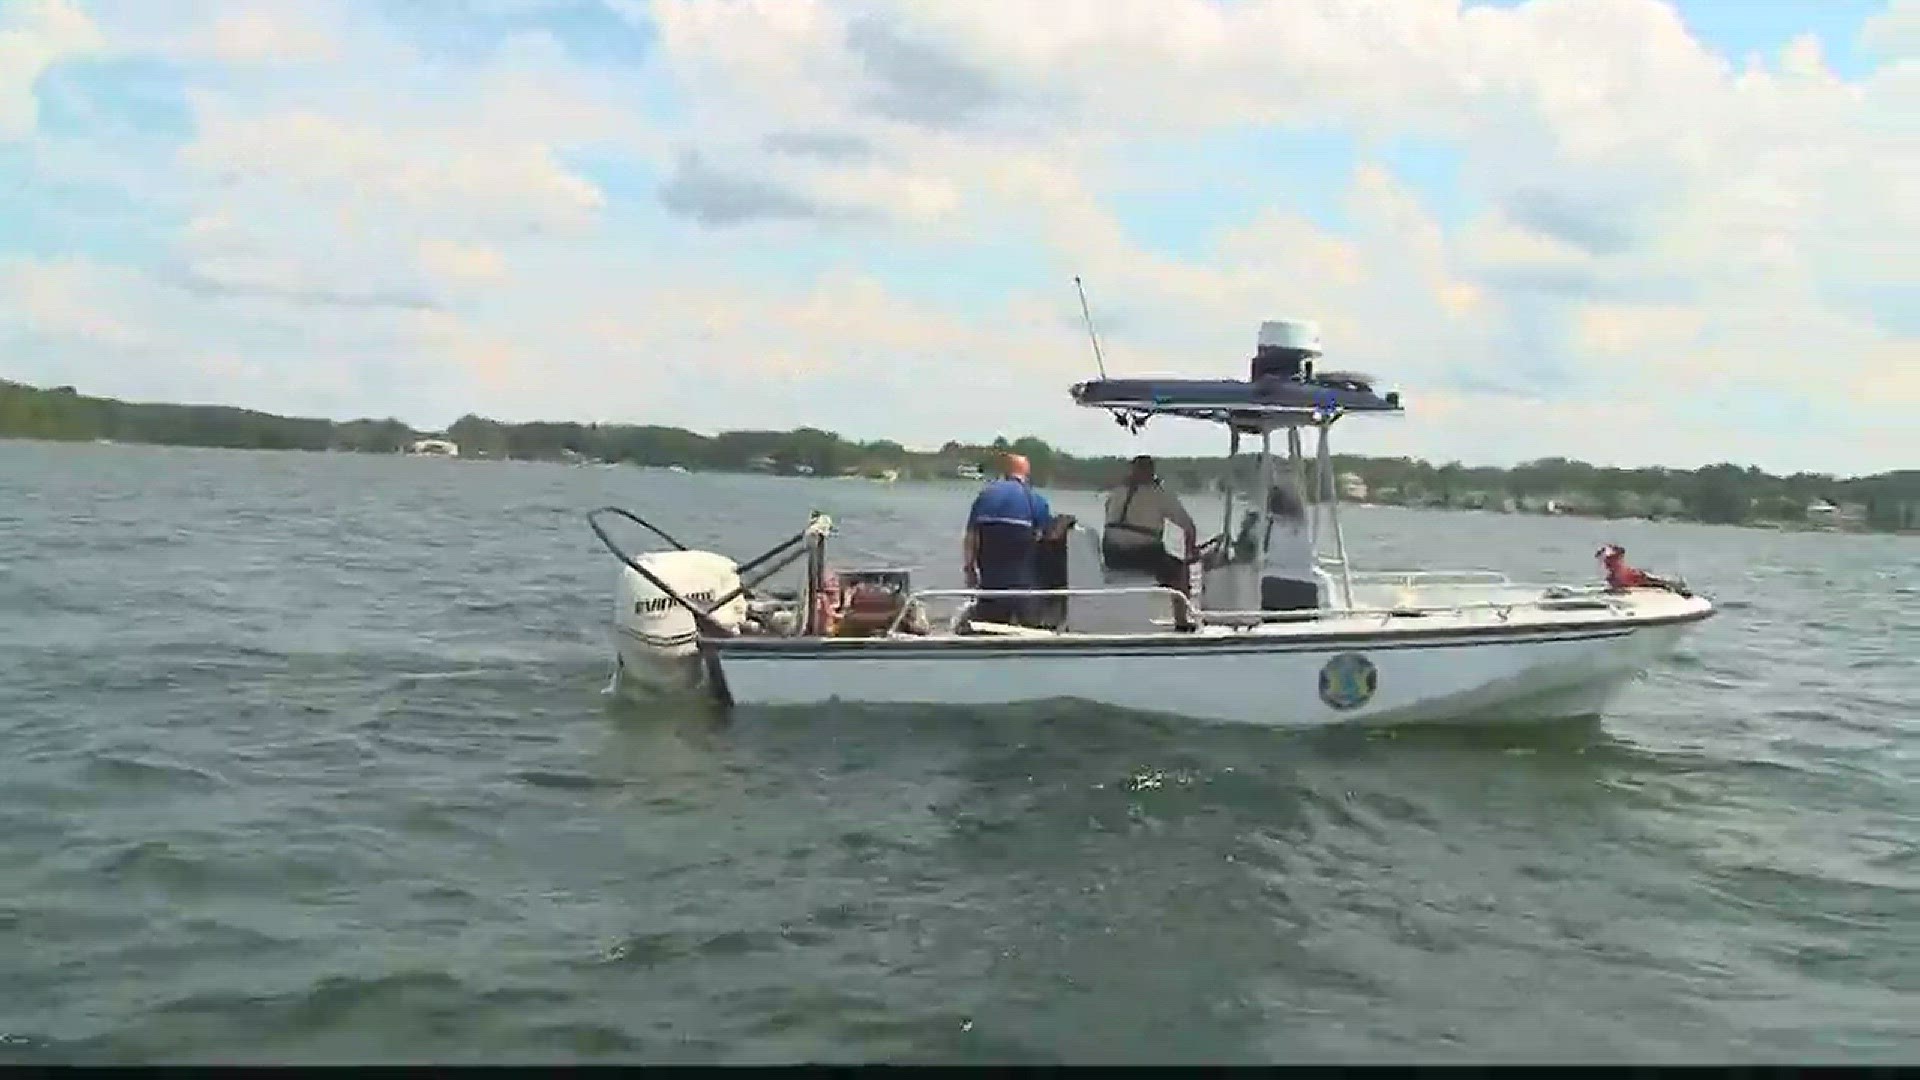 Several agencies are searching for a boater who fell out of a boat Friday night.